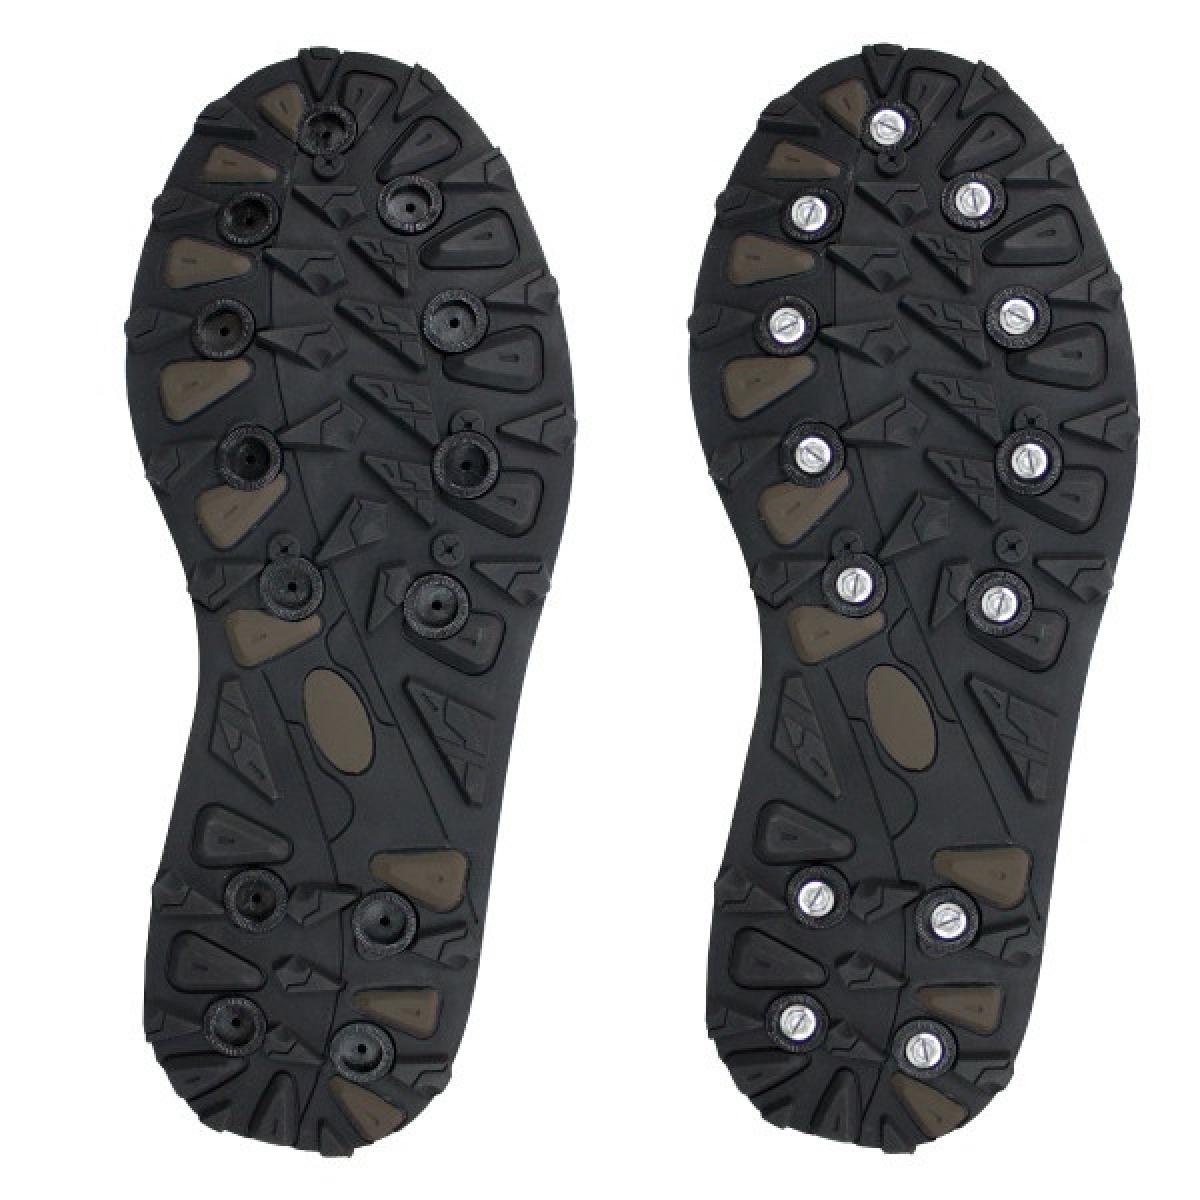 Compass 360 Tailwater II™ Cleated Sole Wading Shoes